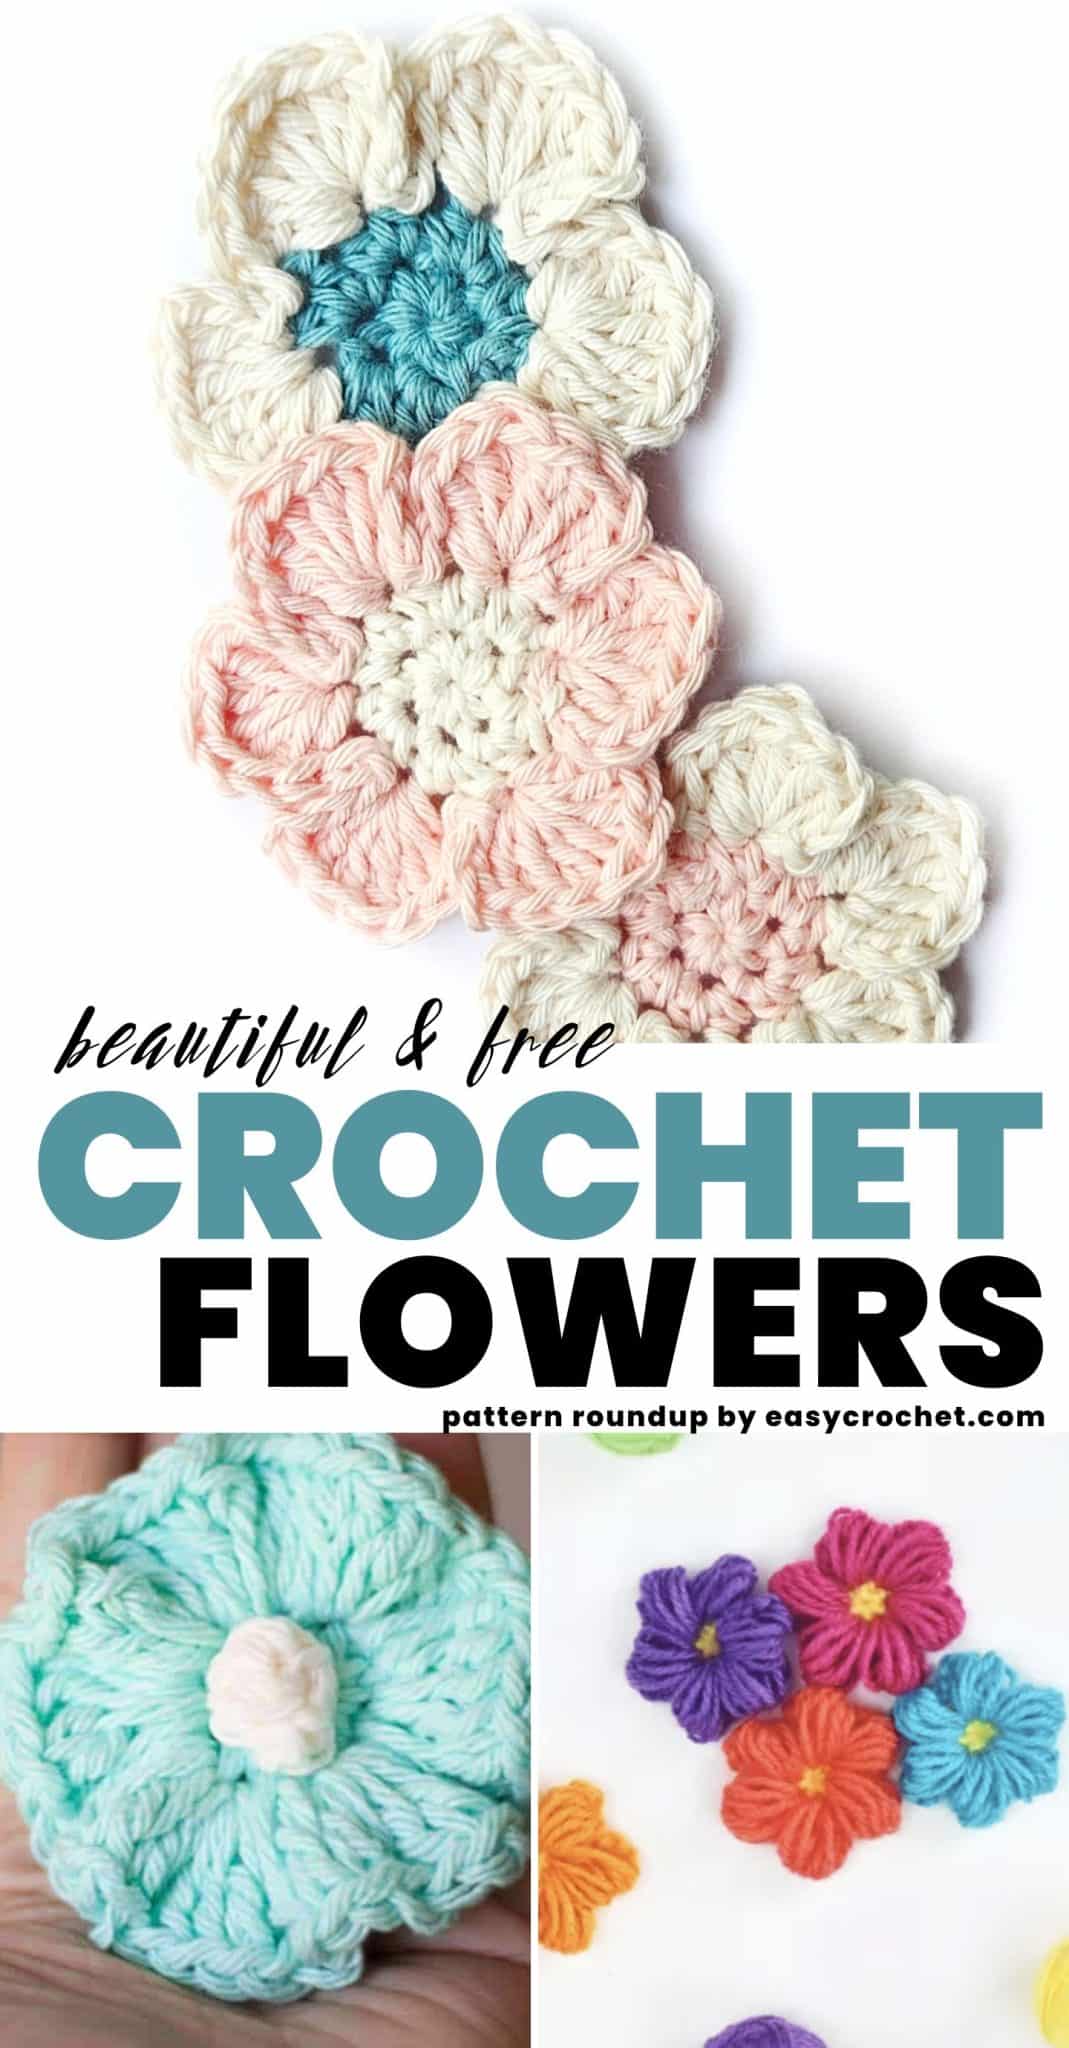 How to Crochet Flowers?